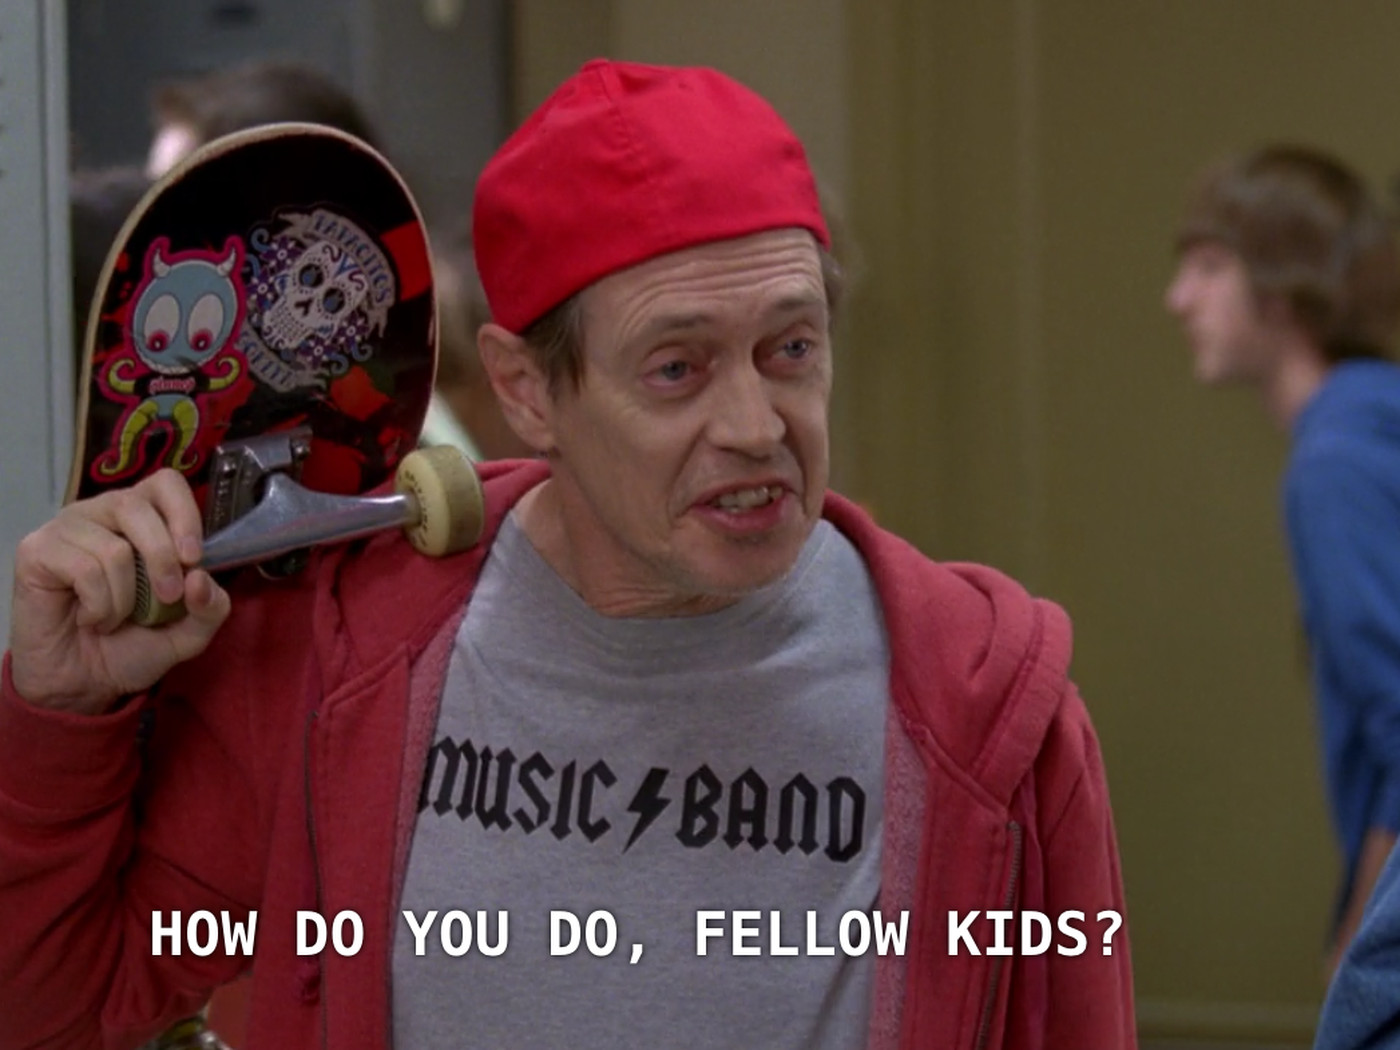 Steve Buscemi pretending to be a teenager at a high school asking 'How do you do, fellow
kids?'